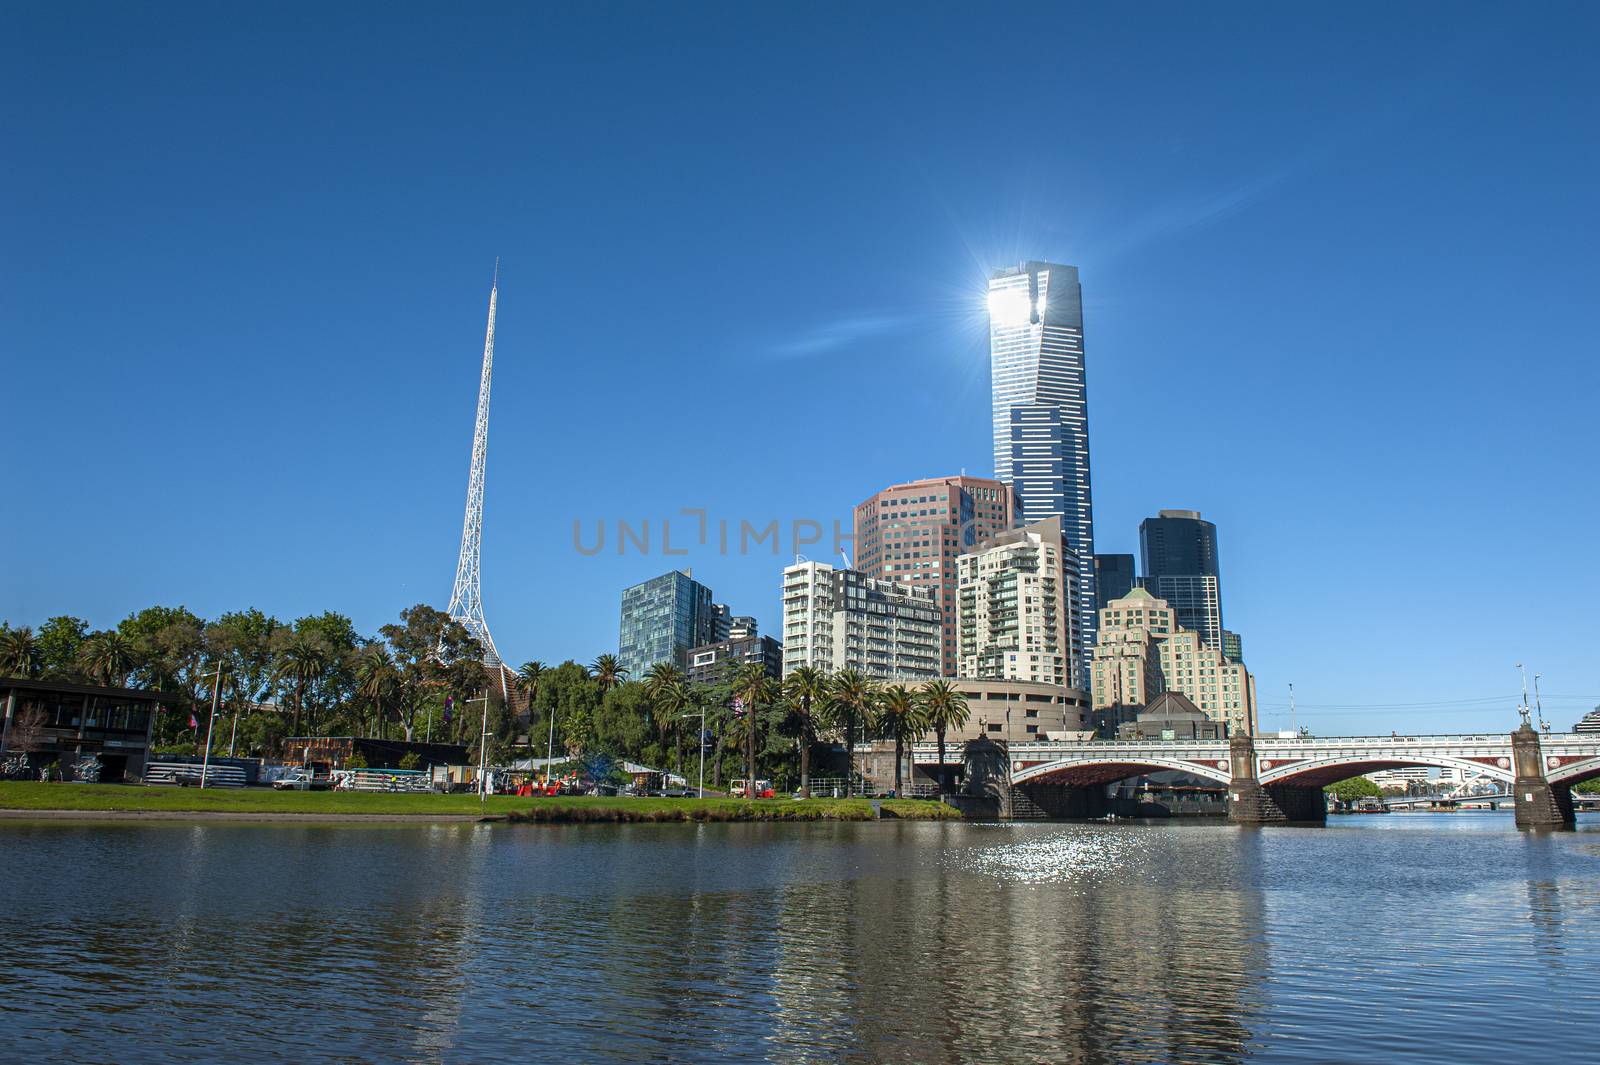 Melbourne skyline with skyscrapers and famous  Melbourne Arts Centre Spire seen across the river Yarra. Victoria, Australia